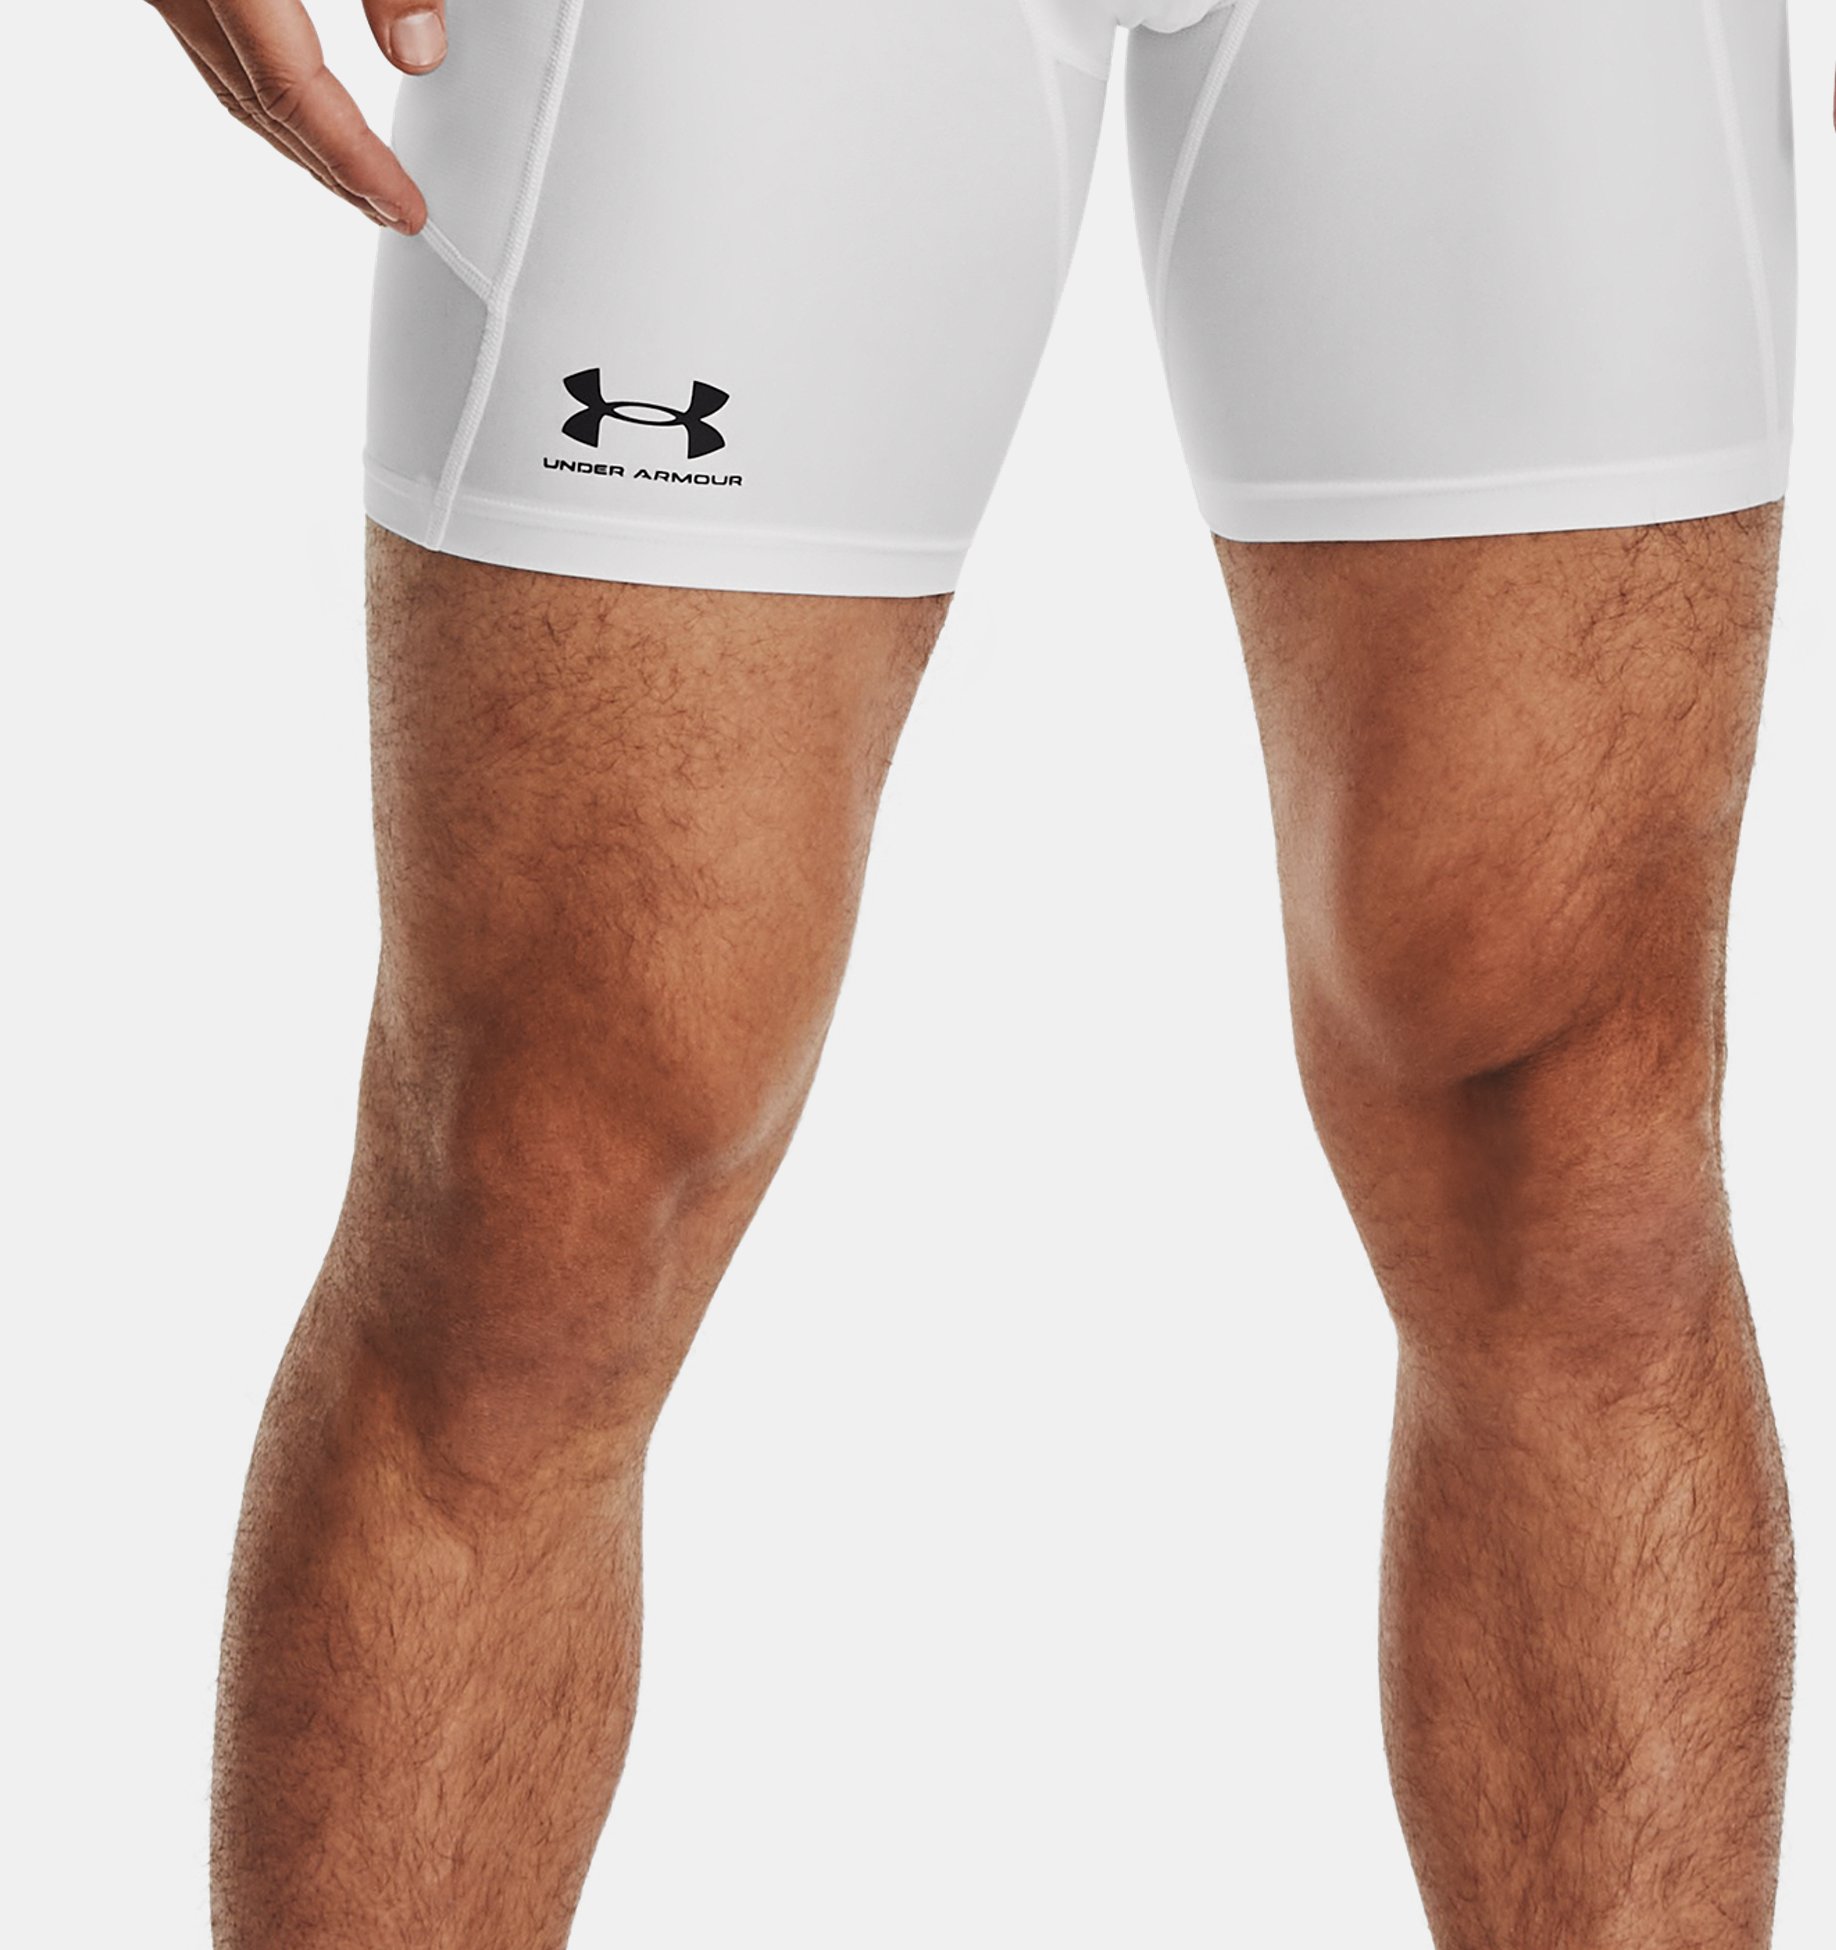 https://underarmour.scene7.com/is/image/Underarmour/V5-1361596-100_FC?rp=standard-0pad|pdpZoomDesktop&scl=0.72&fmt=jpg&qlt=85&resMode=sharp2&cache=on,on&bgc=f0f0f0&wid=1836&hei=1950&size=1500,1500